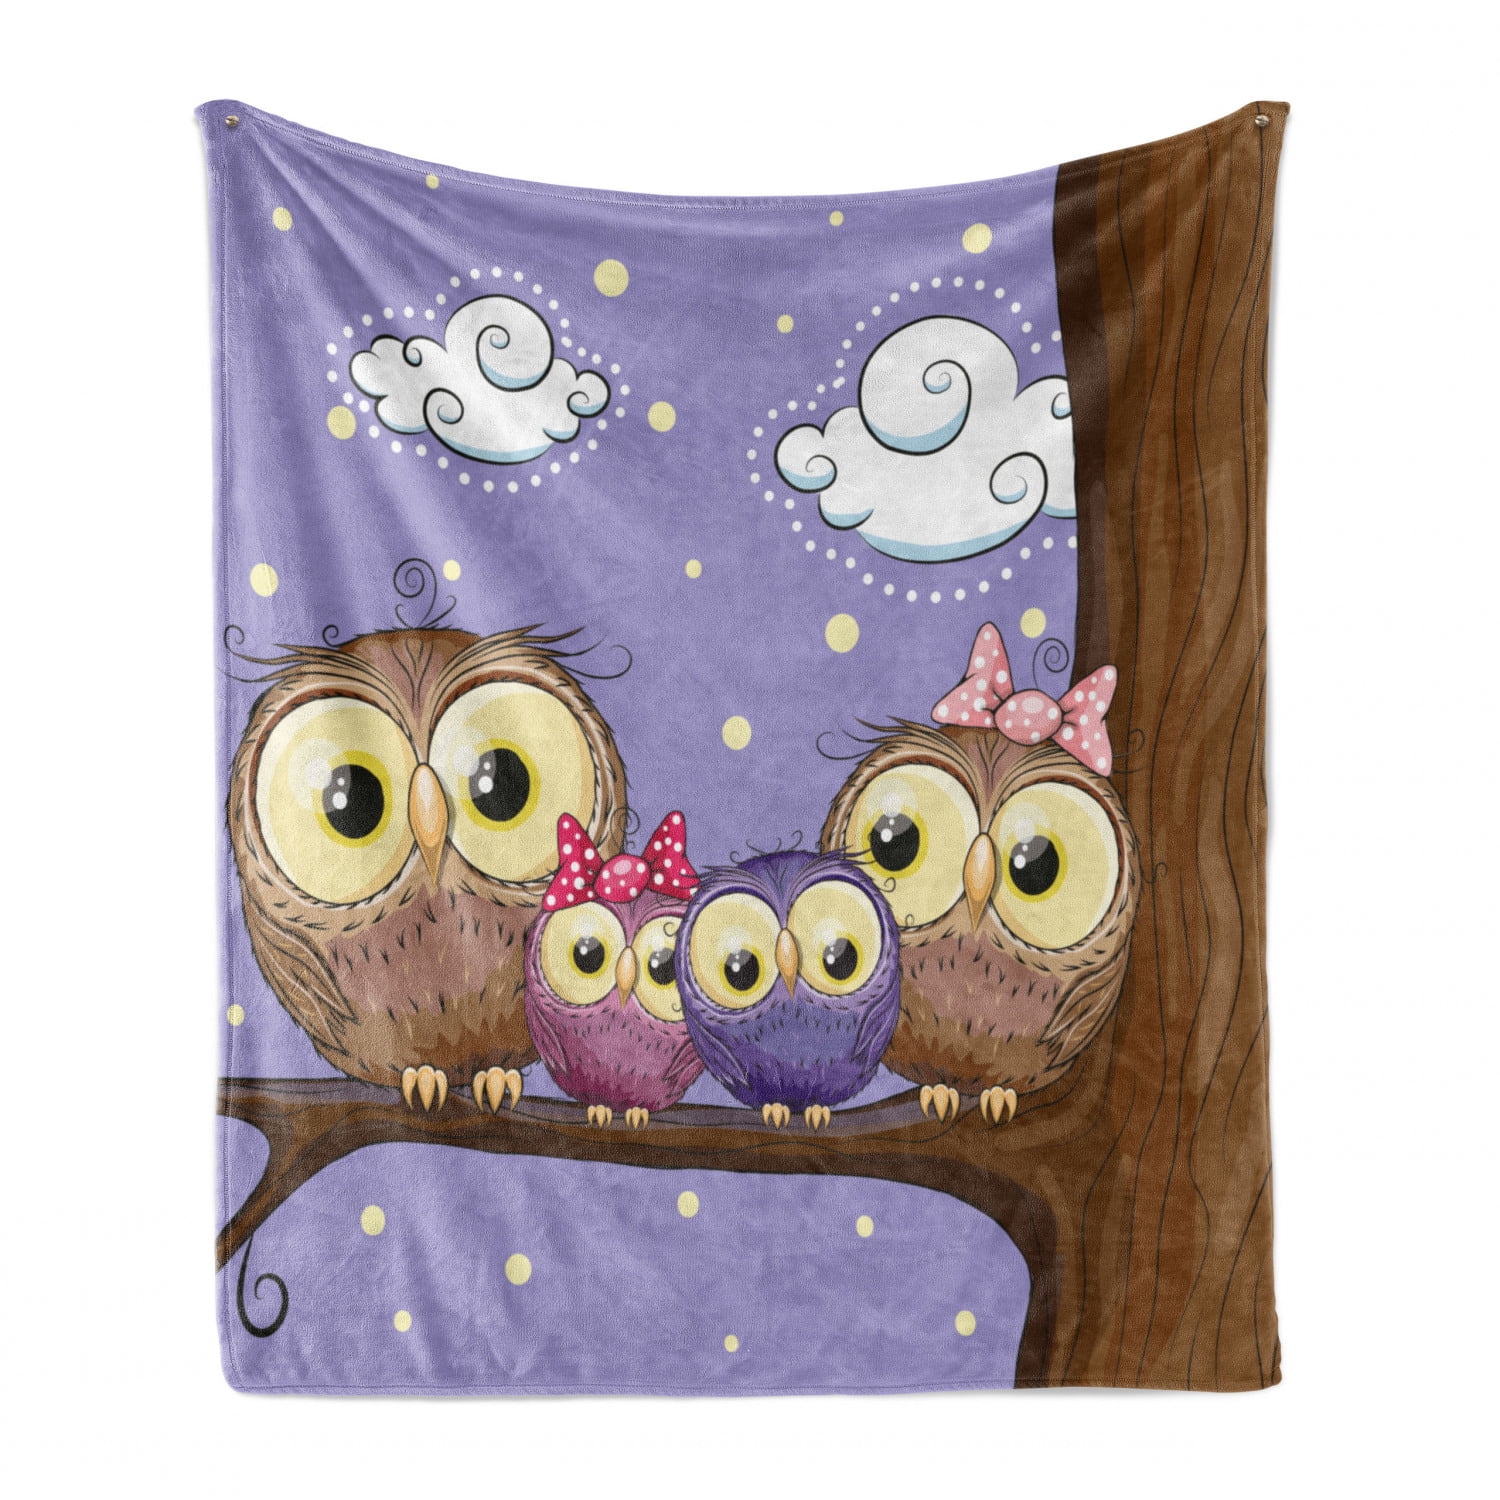 Pretty Cute Fleece Winter Throw Blankets for Adults Suitable Bed Couch Outdoor Soft Cozy Owl Flannel Blankets 